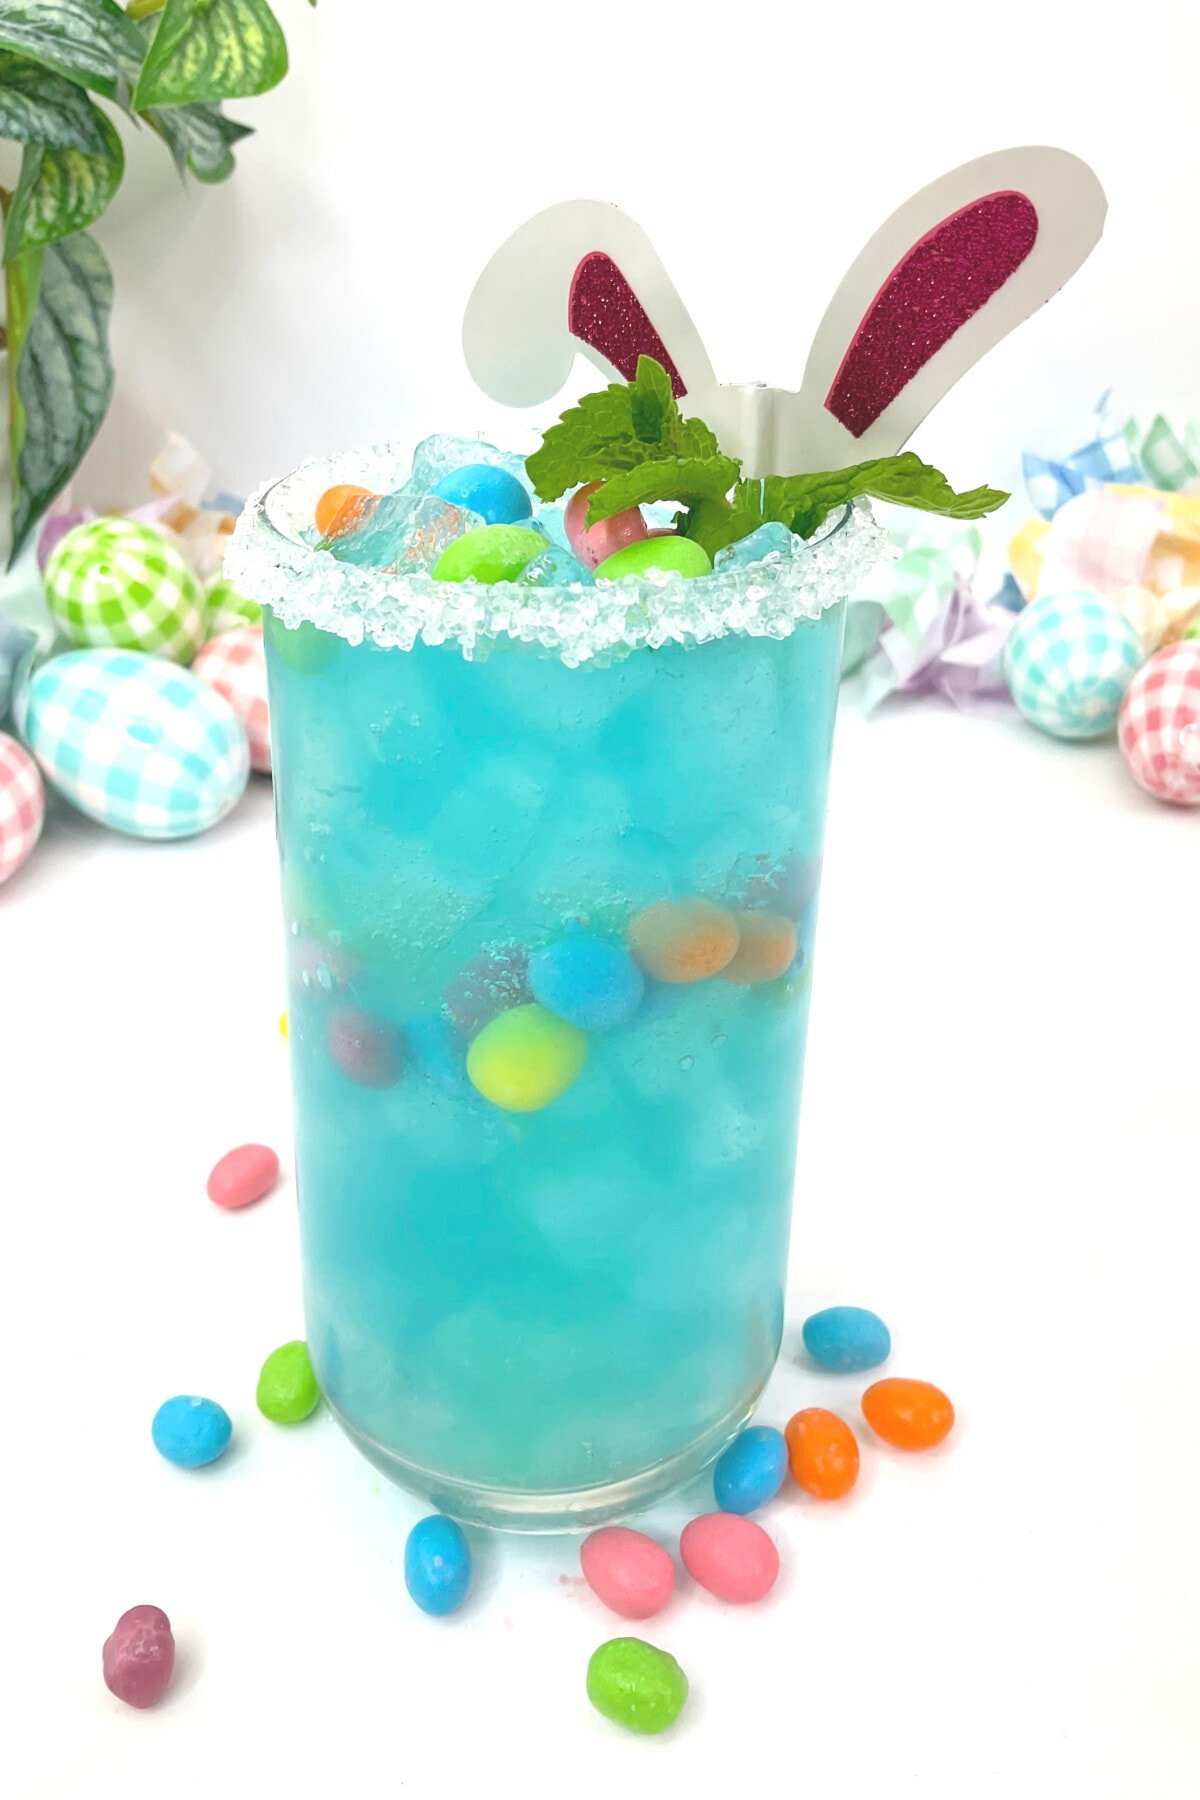 Jelly Bean Cocktail on a white table.